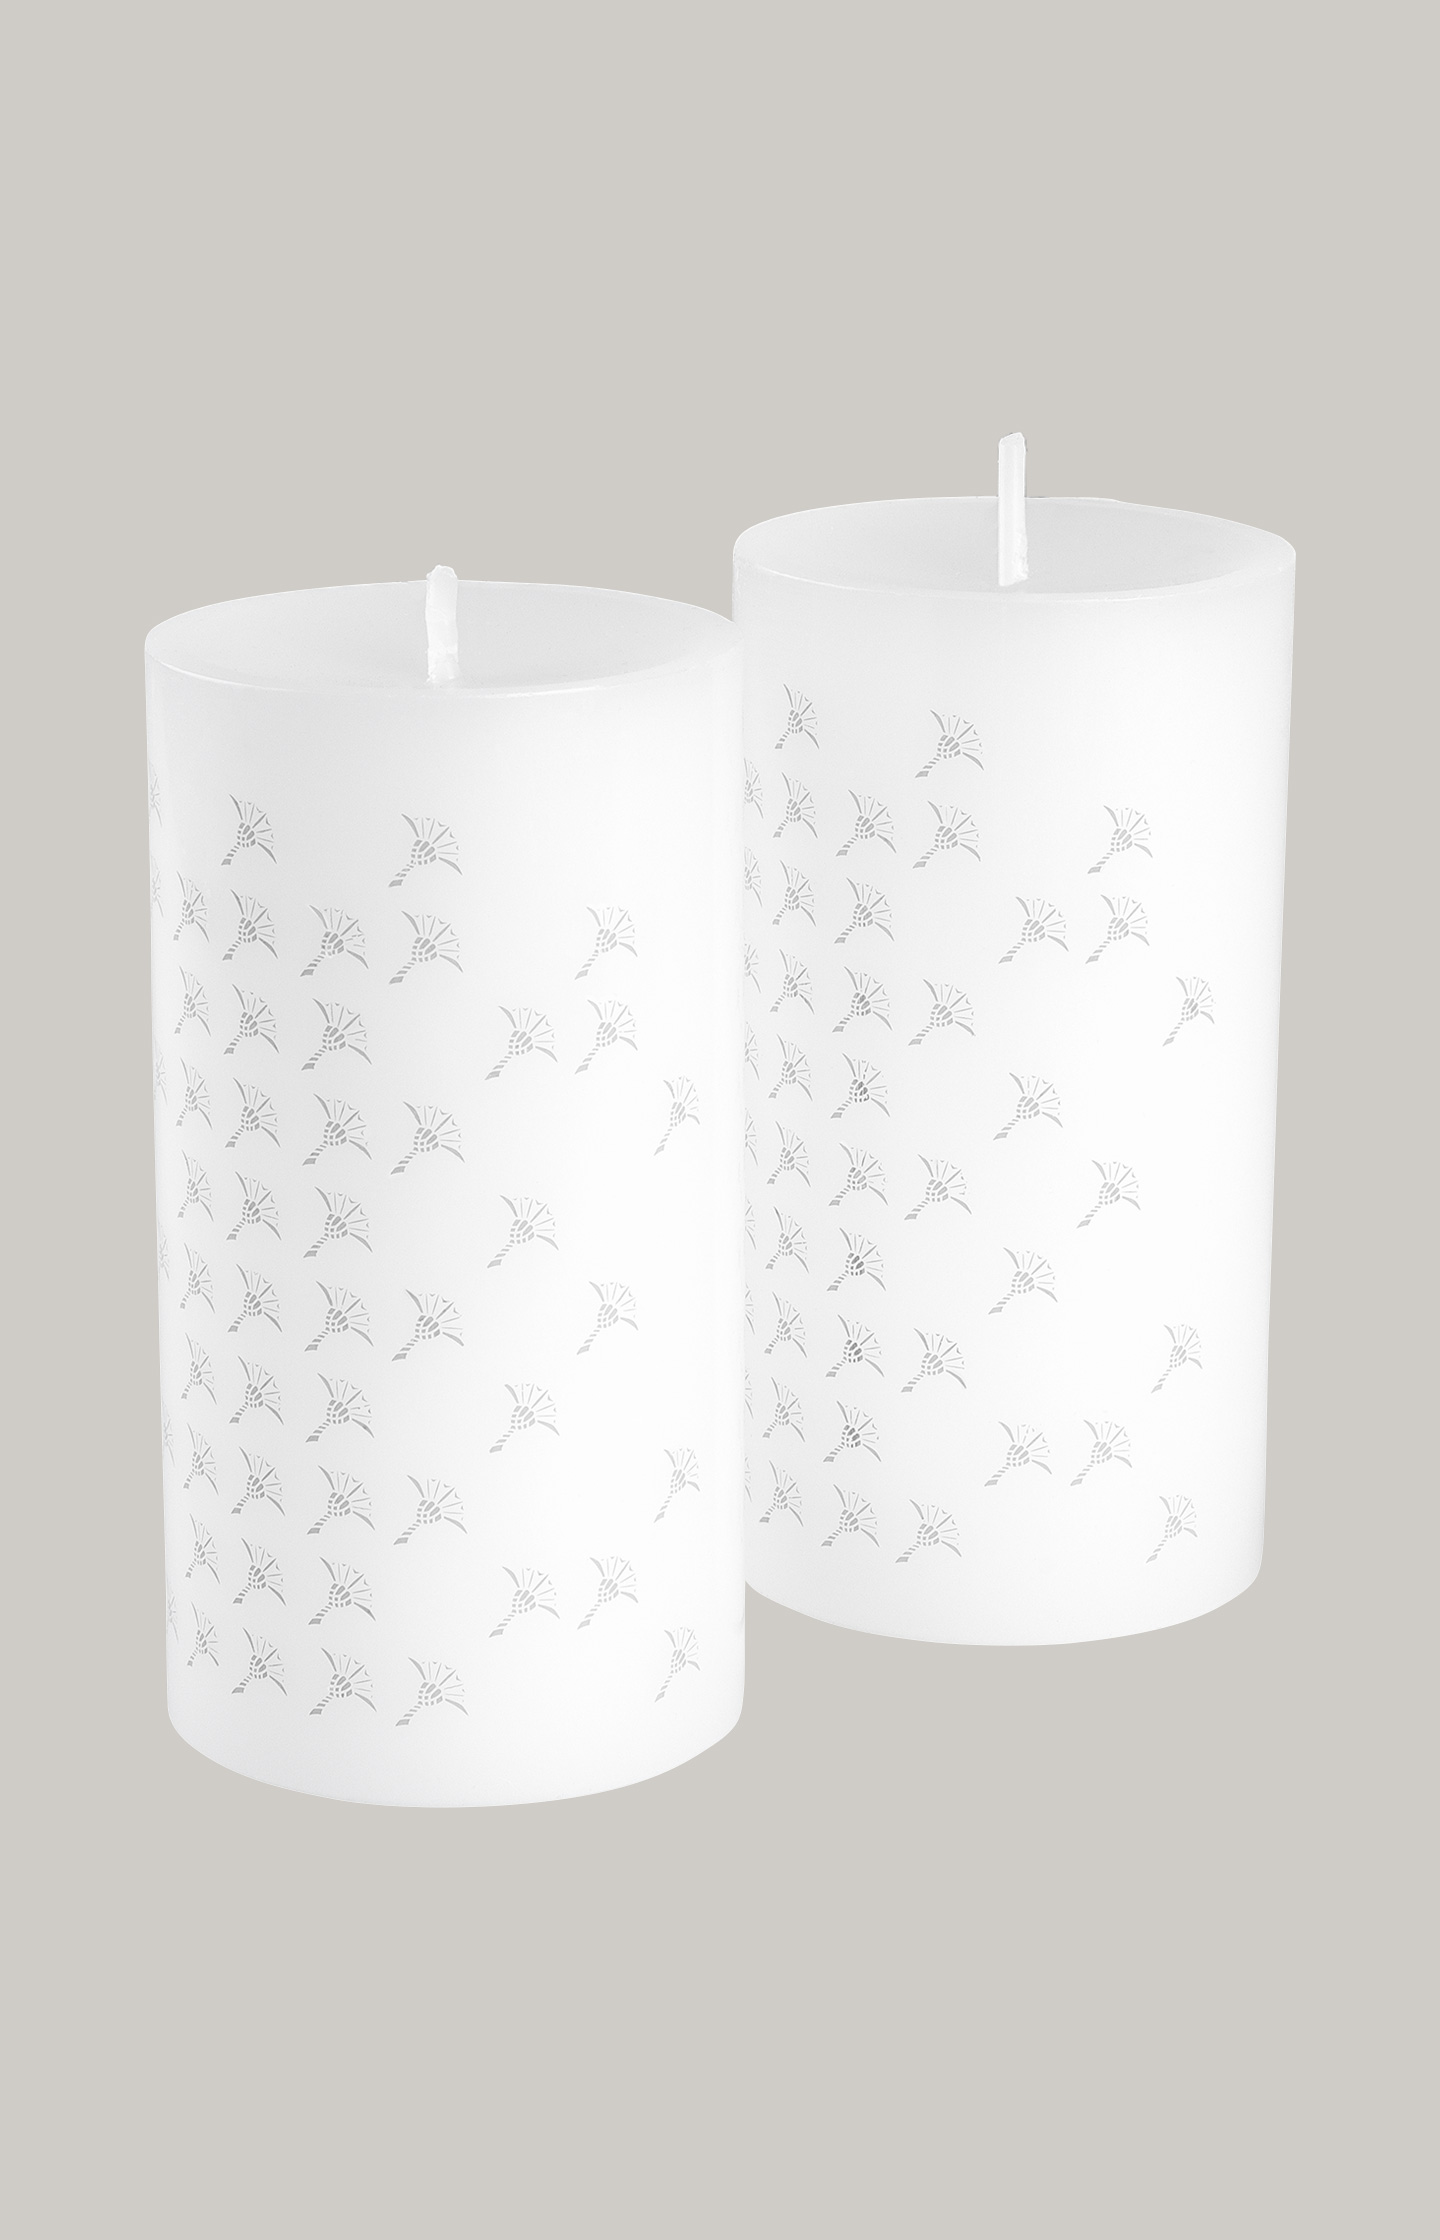 JOOP! pillar New Online candle in tall FADED cm 15 2, in - Shop set CORNFLOWER of - white JOOP! the